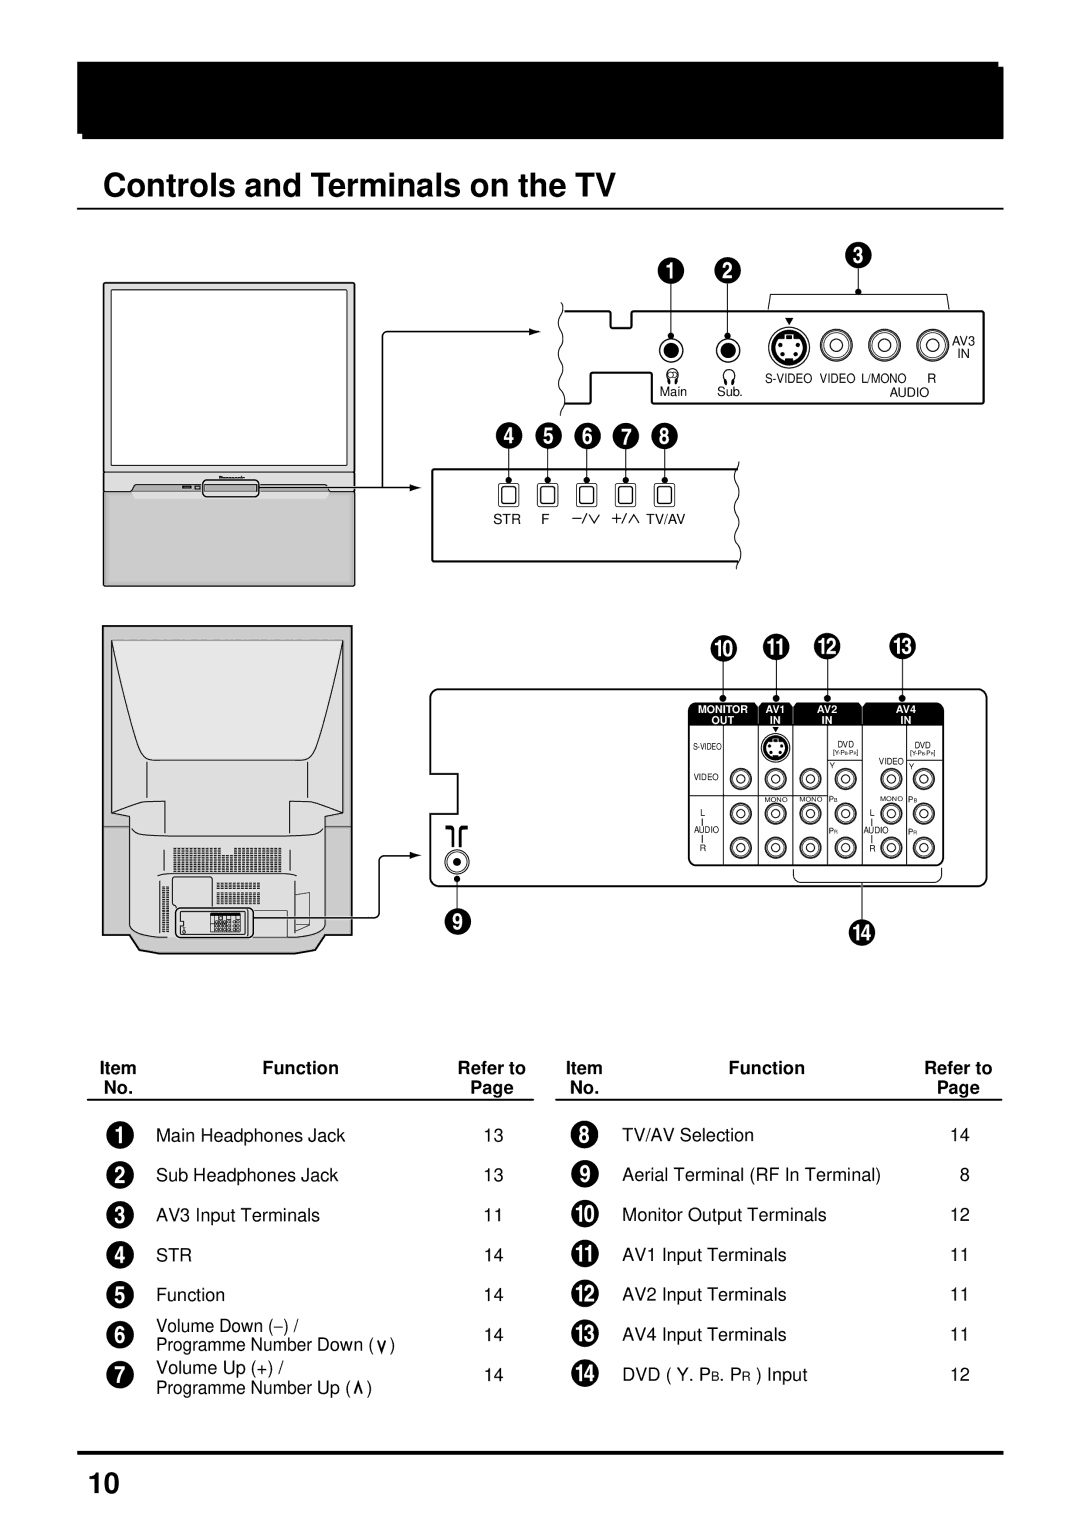 Panasonic TX-51P250H, TX-43P250X, TX-43P250H Location of Controls, Controls and Terminals on the TV, Function Refer to, Str 